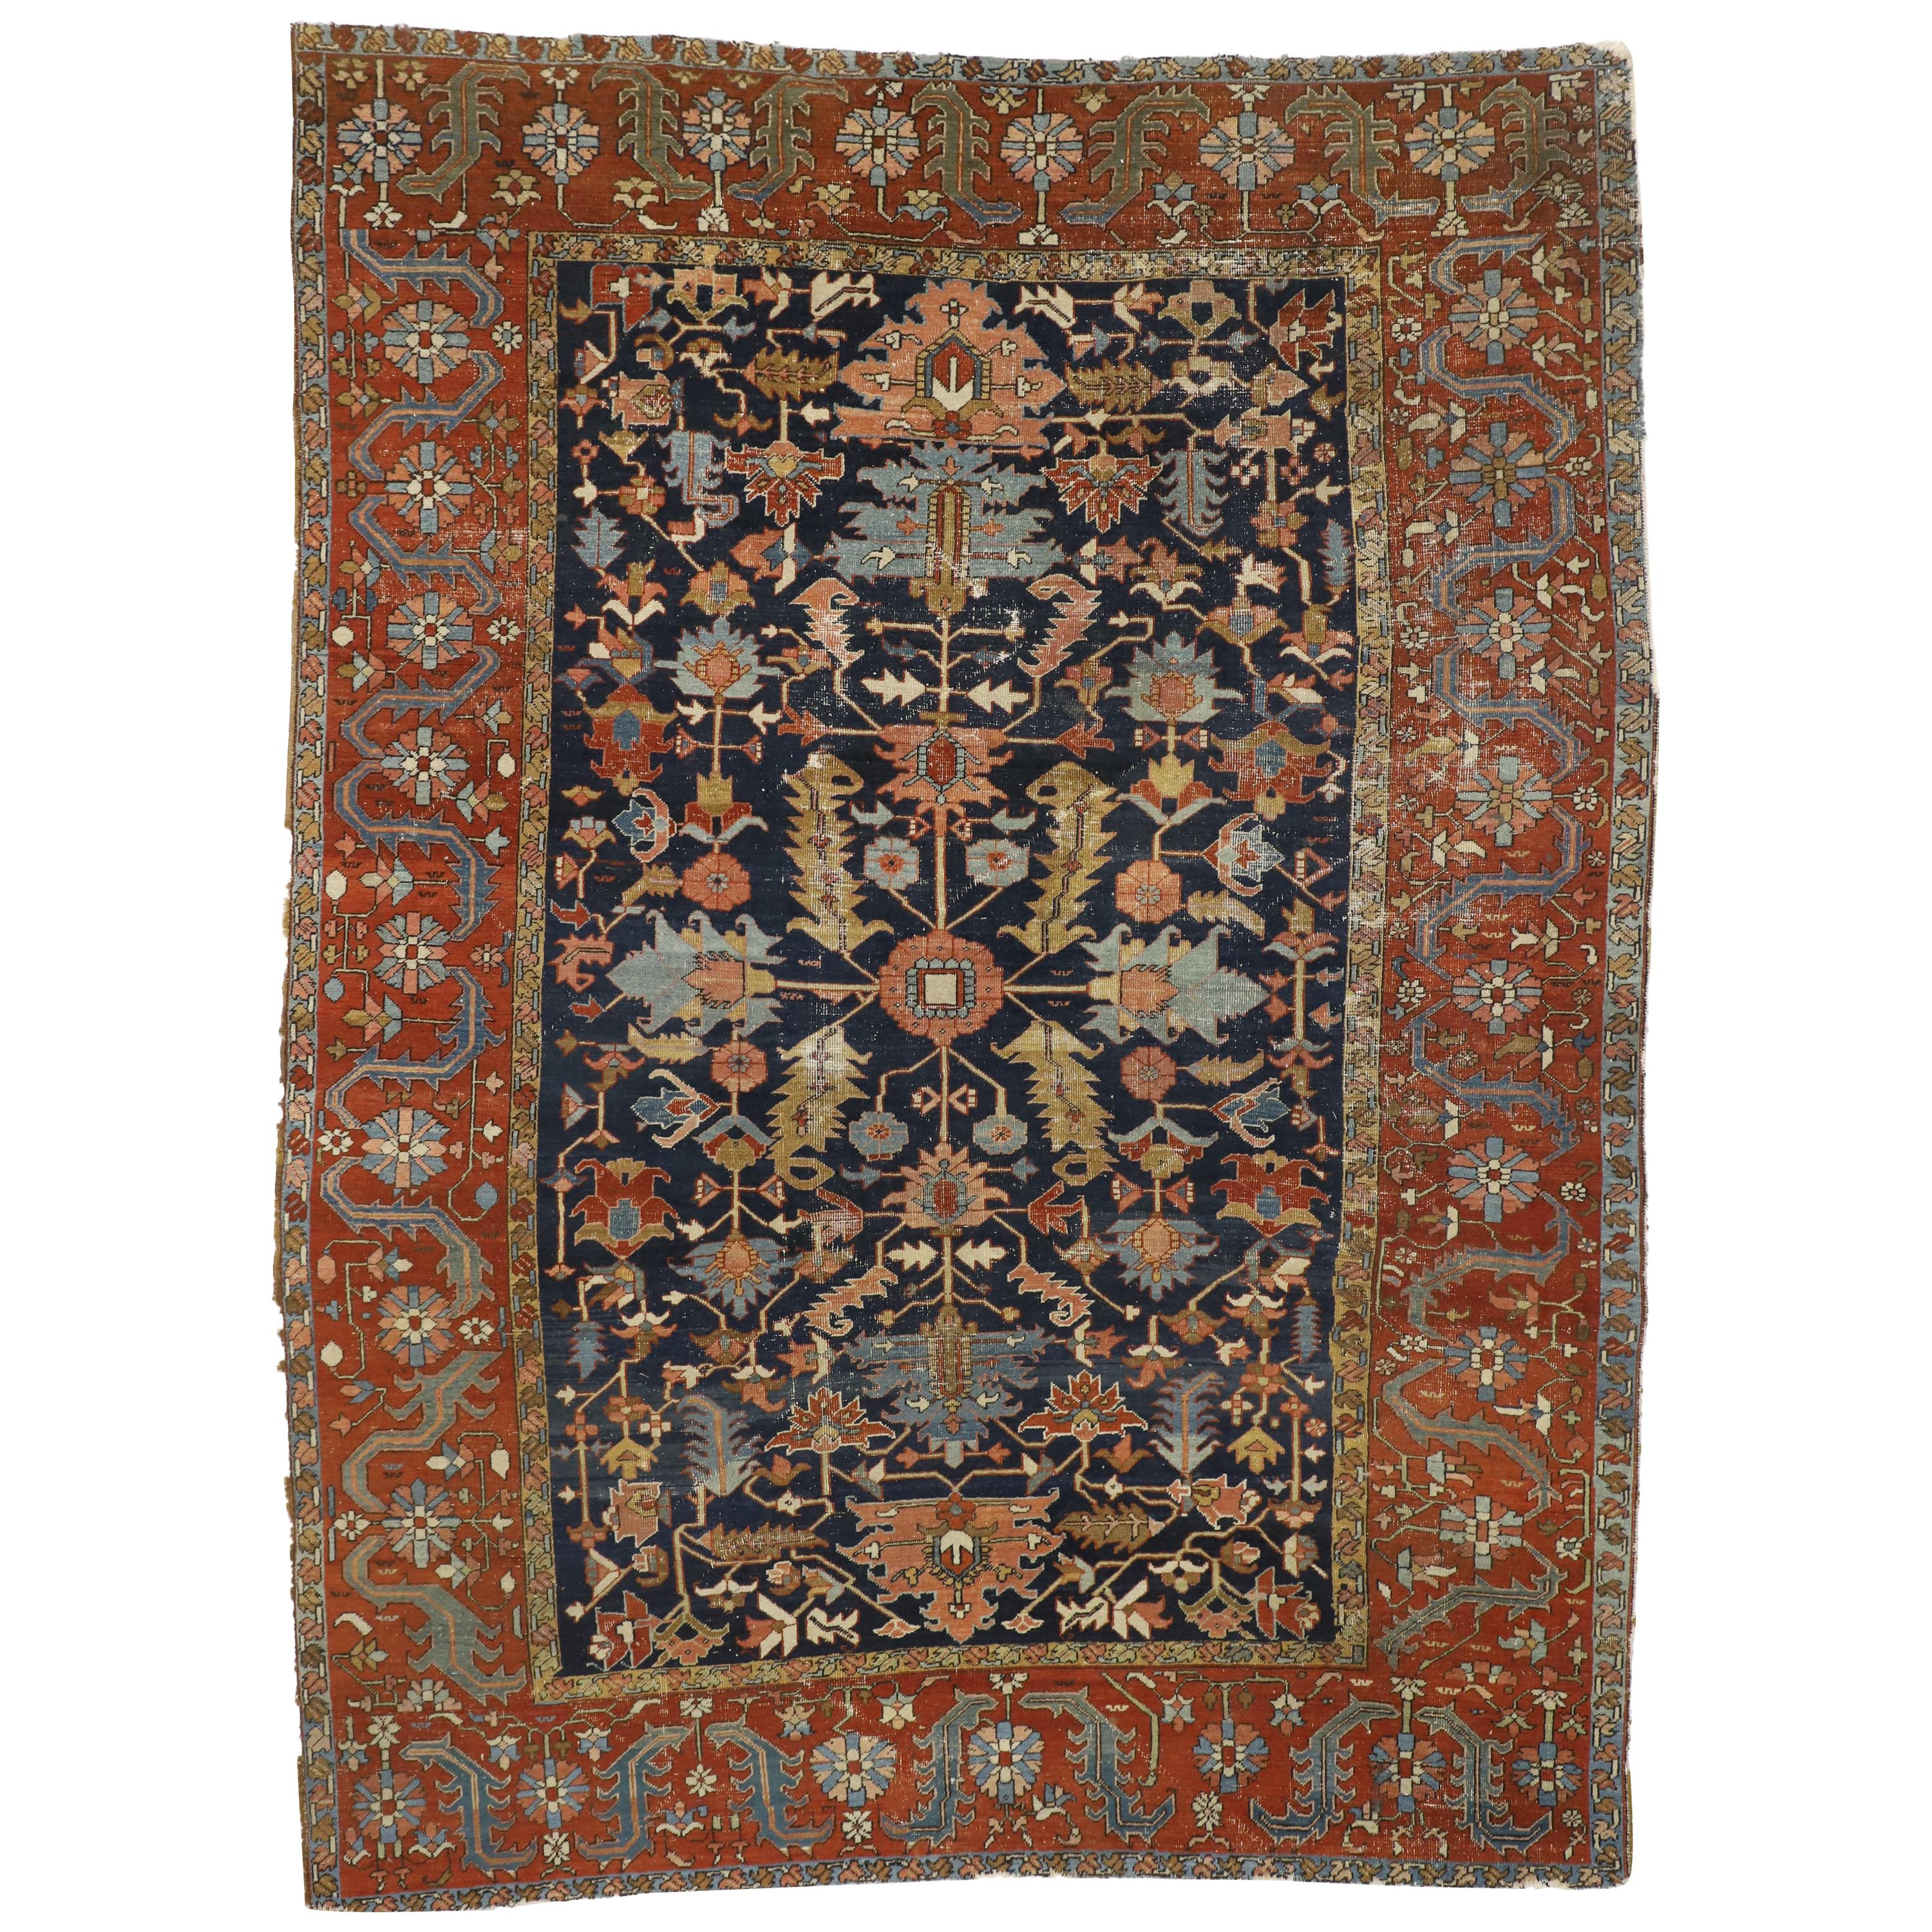 Distressed Antique Persian All-Over Serapi Rug with Rustic Downton Abbey Style For Sale